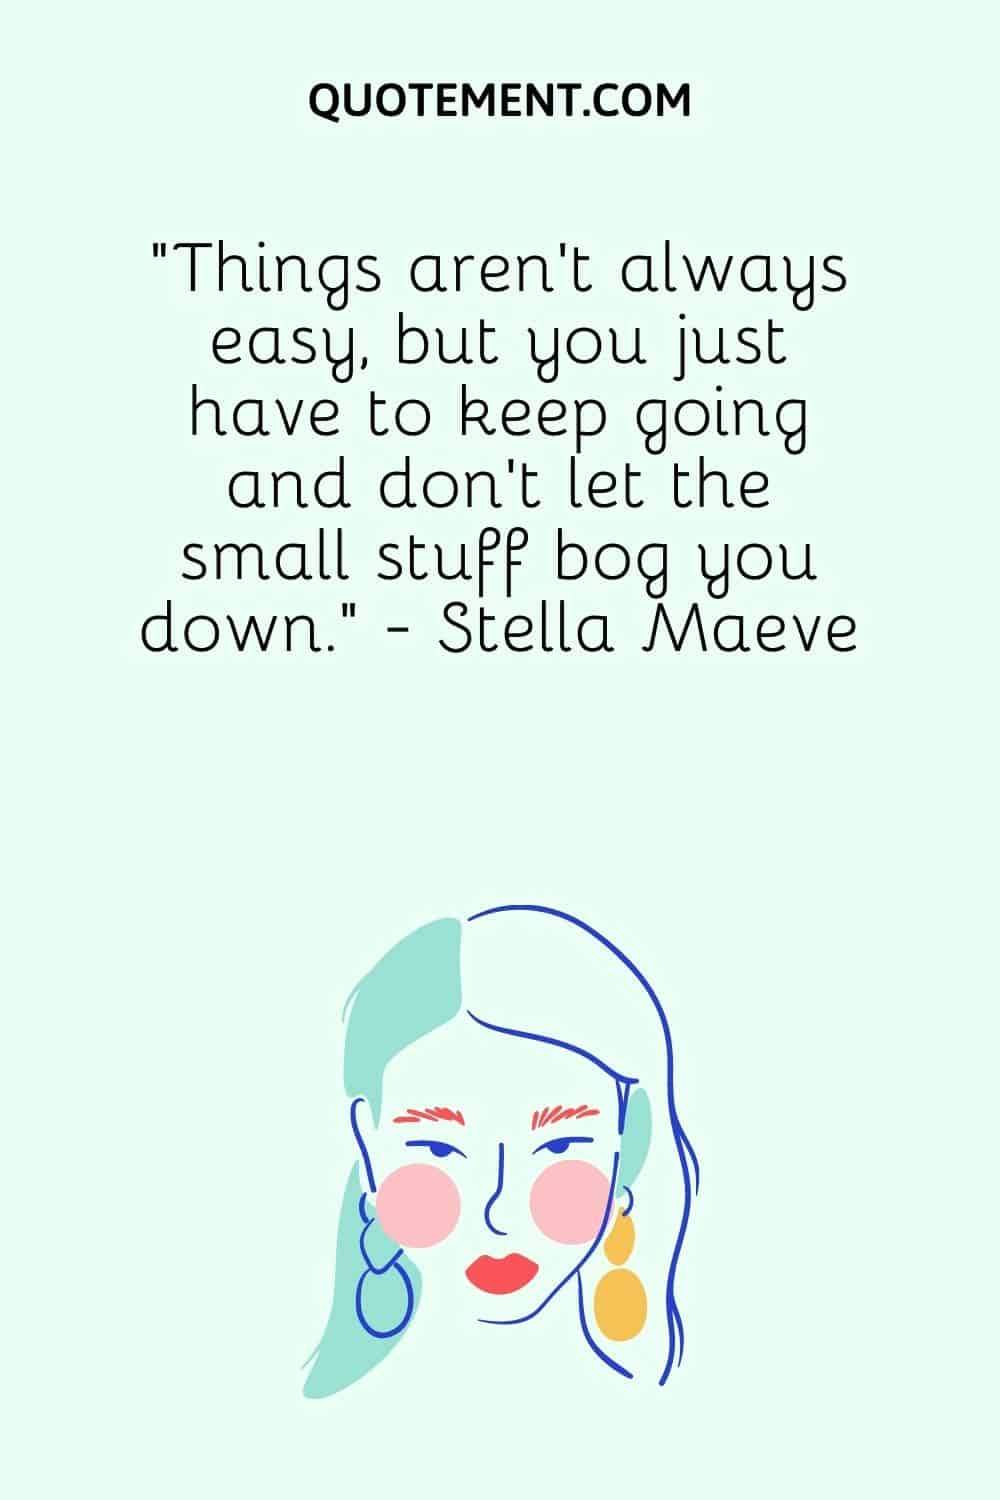 “Things aren’t always easy, but you just have to keep going and don’t let the small stuff bog you down.” - Stella Maeve